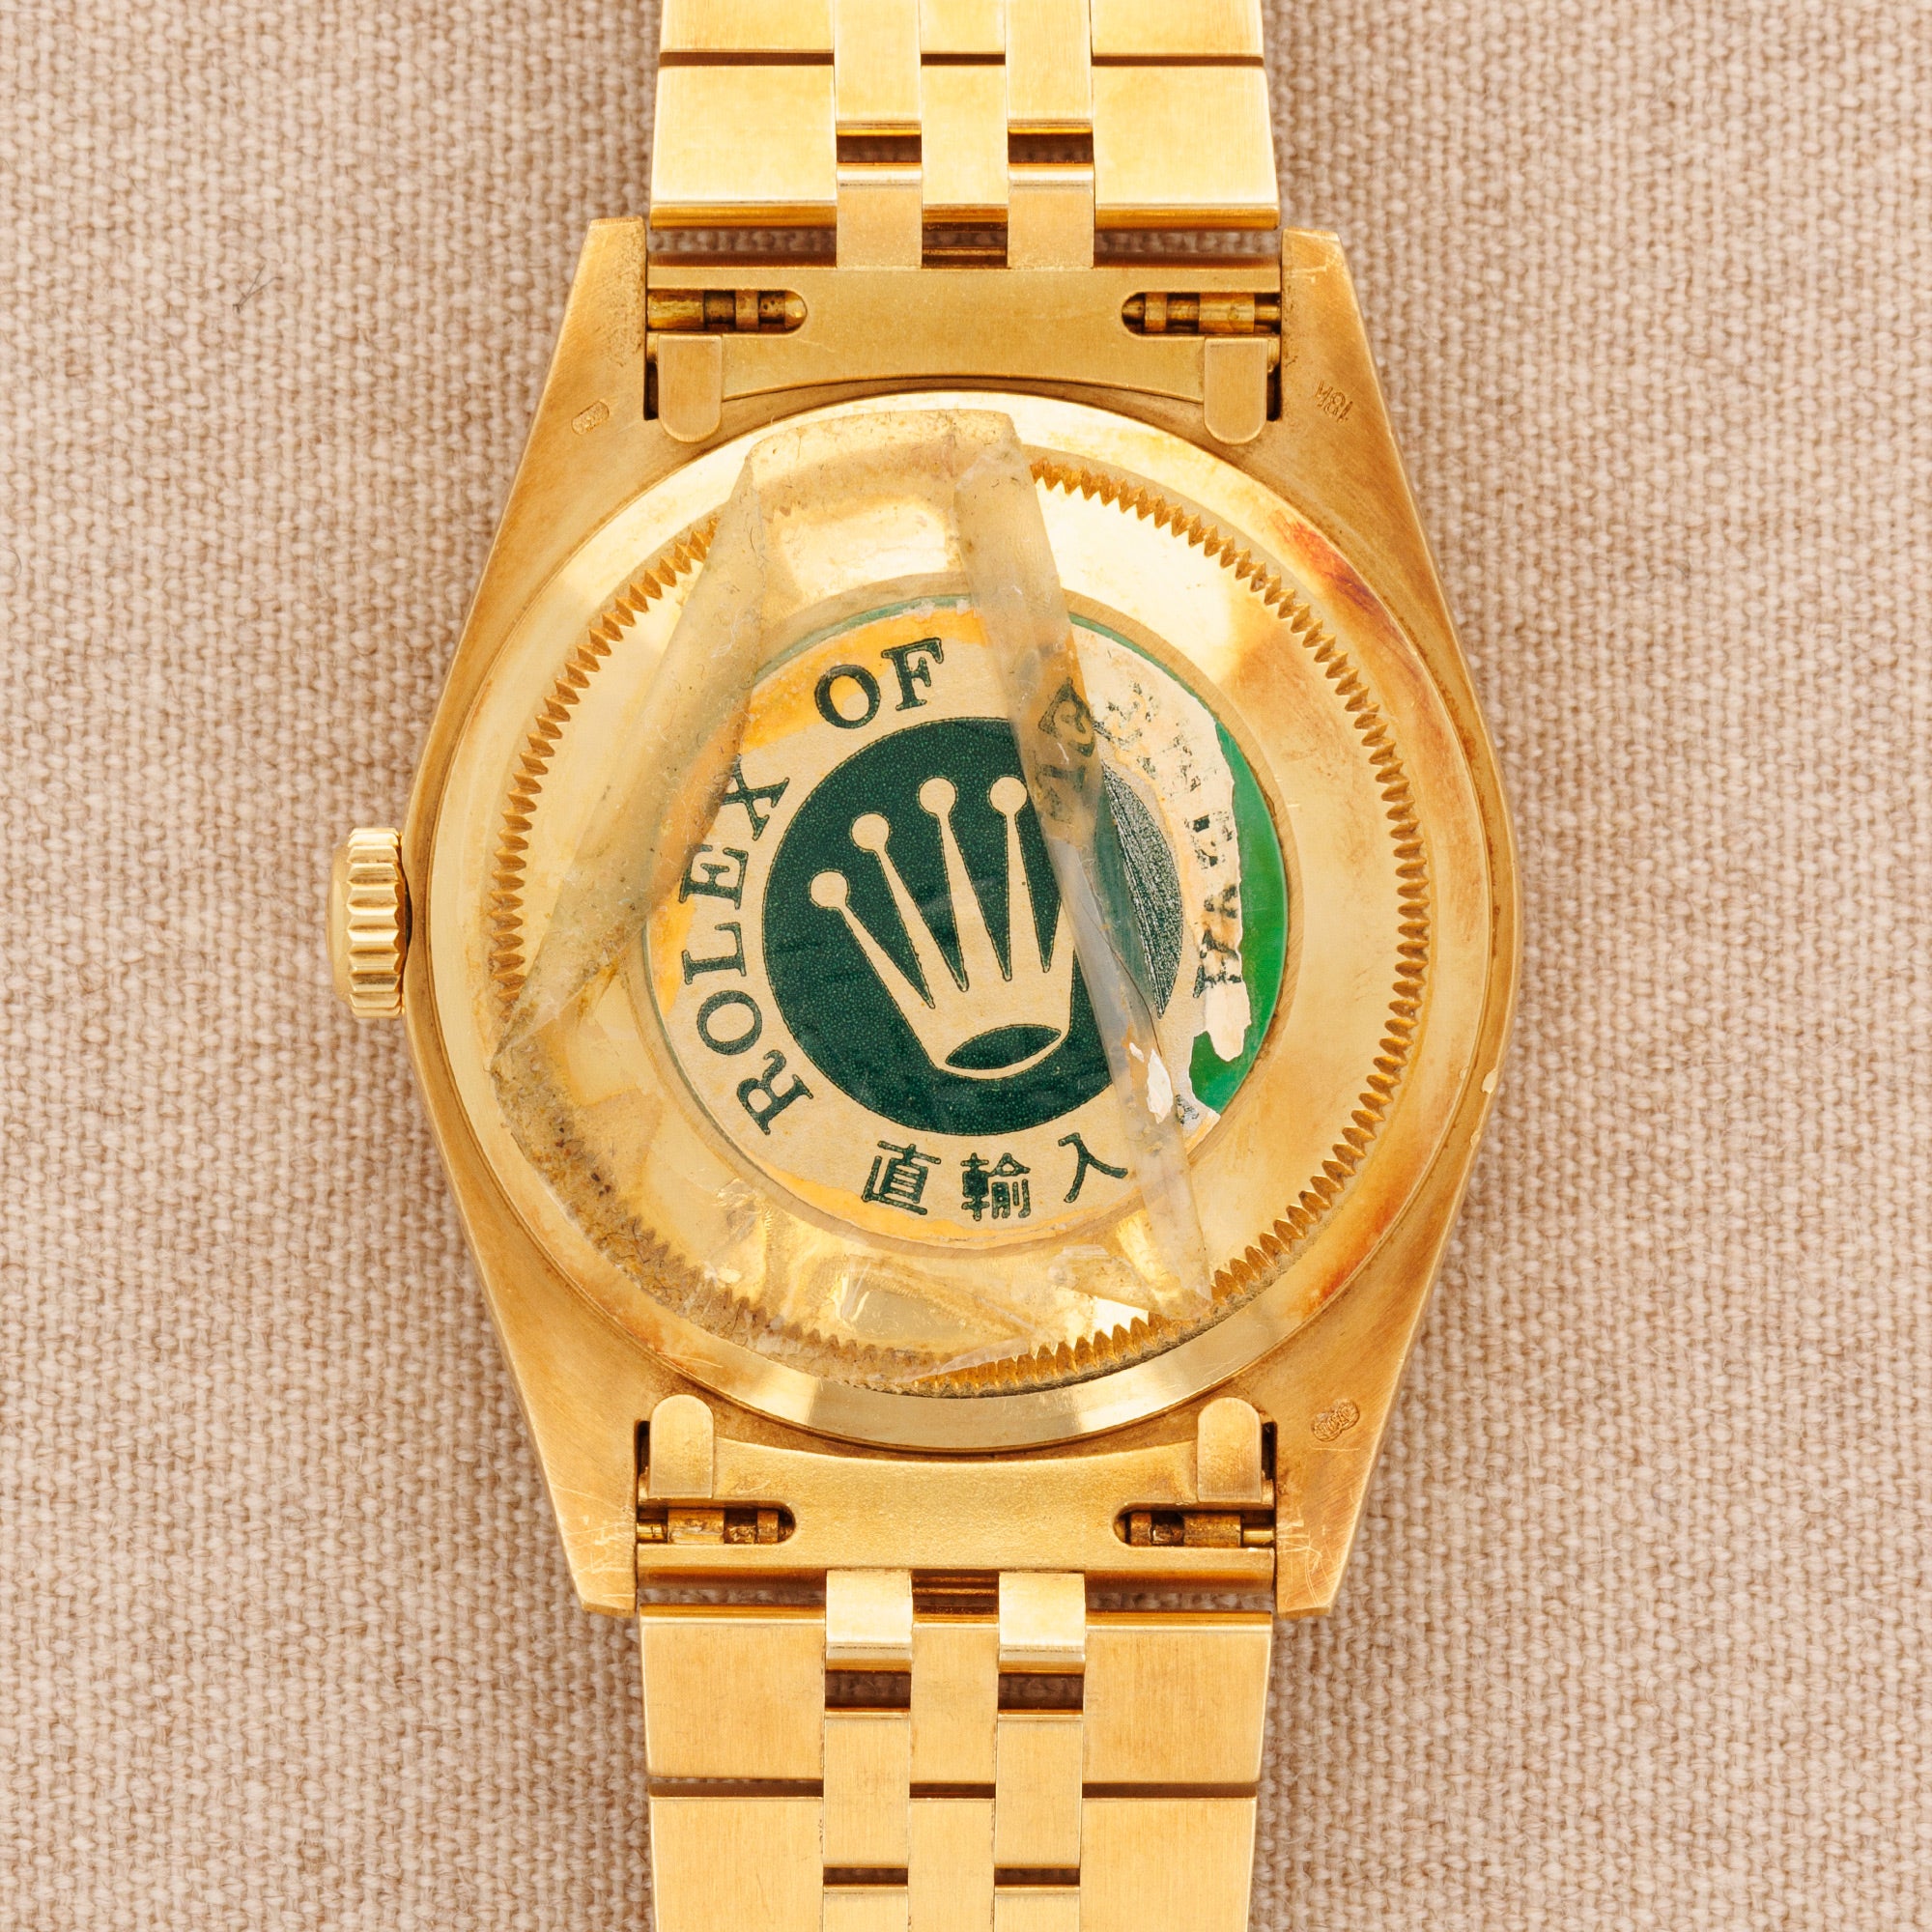 Rolex Yellow Gold Datejust Ref. 16238 with Malachite Dial